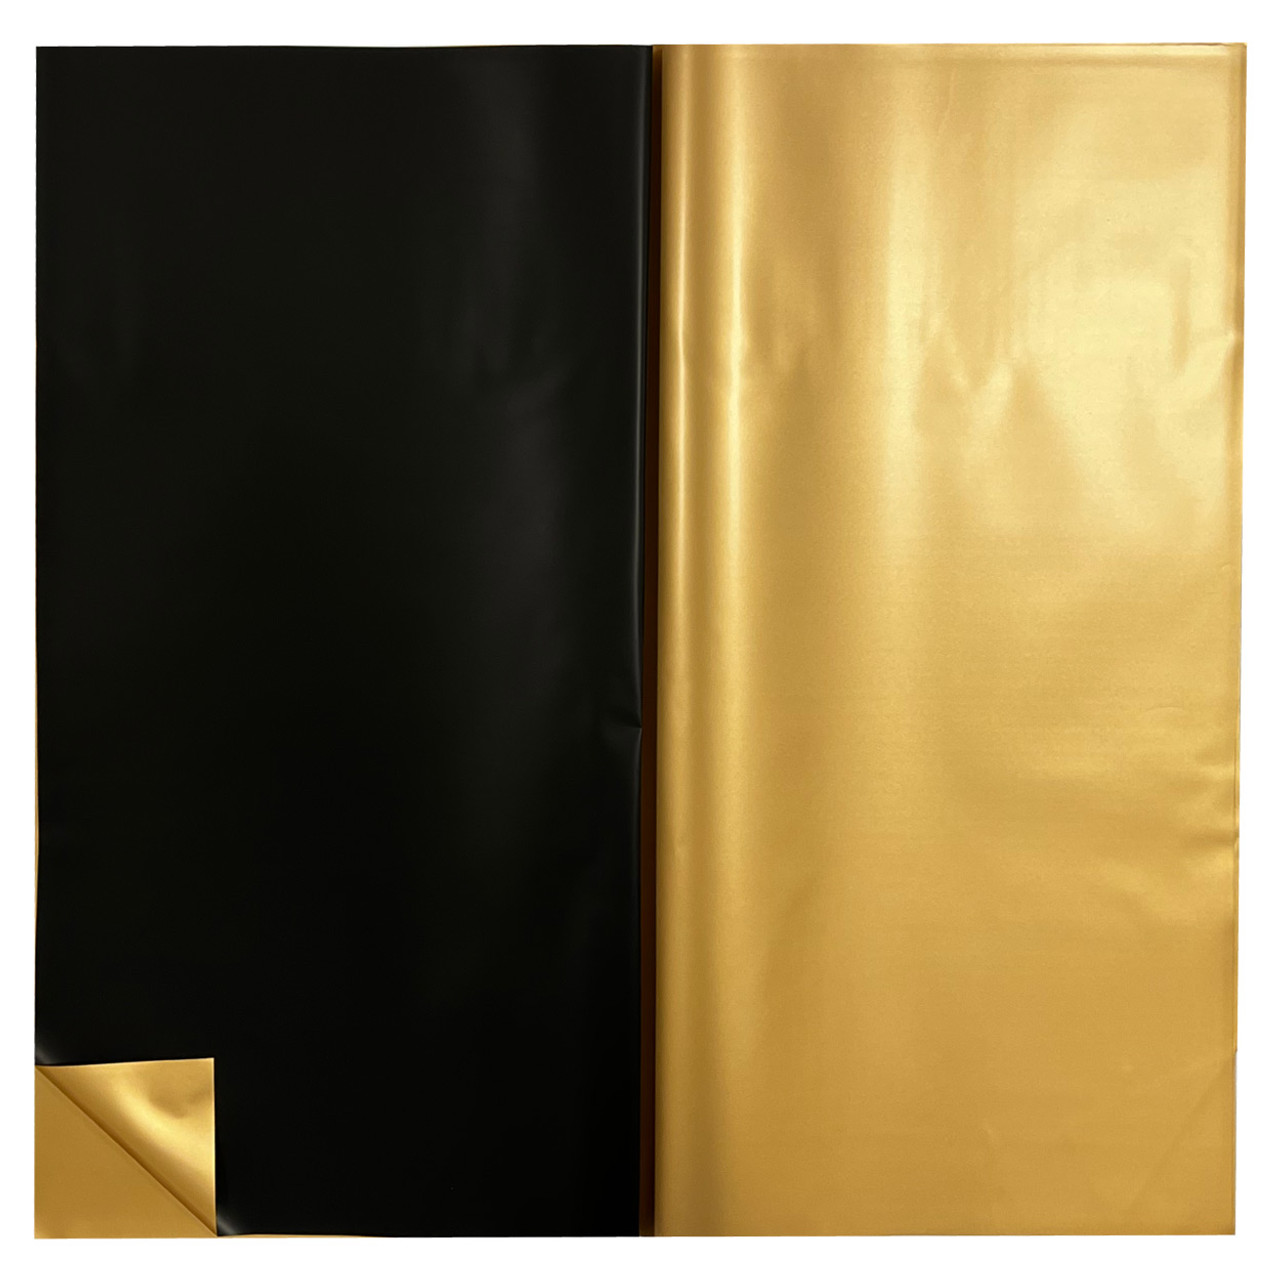  Cabilock 20 Sheets gold-edged wrapping paper floral